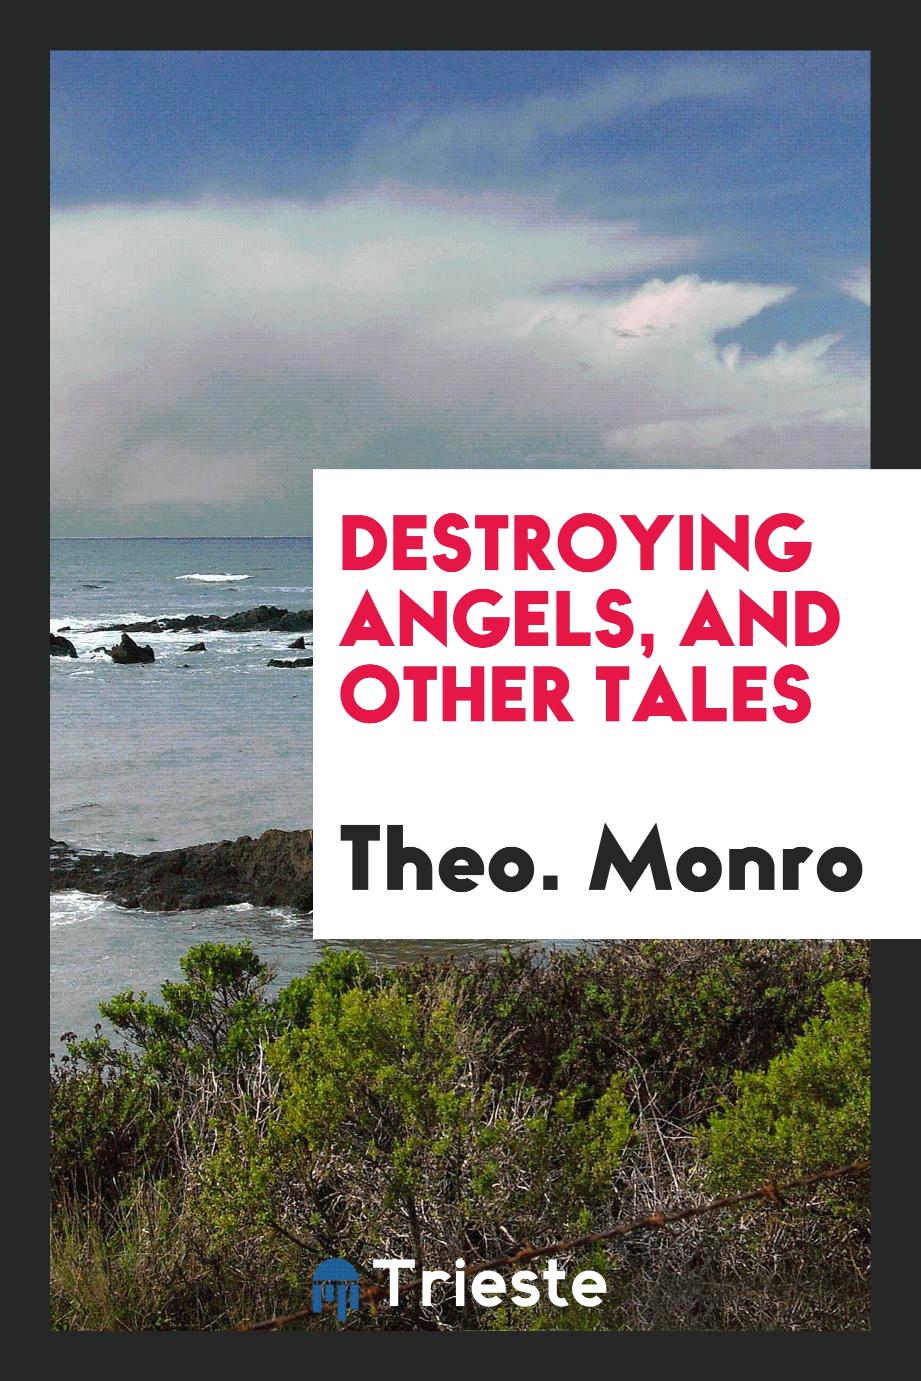 Theo. Monro - Destroying Angels, and Other Tales